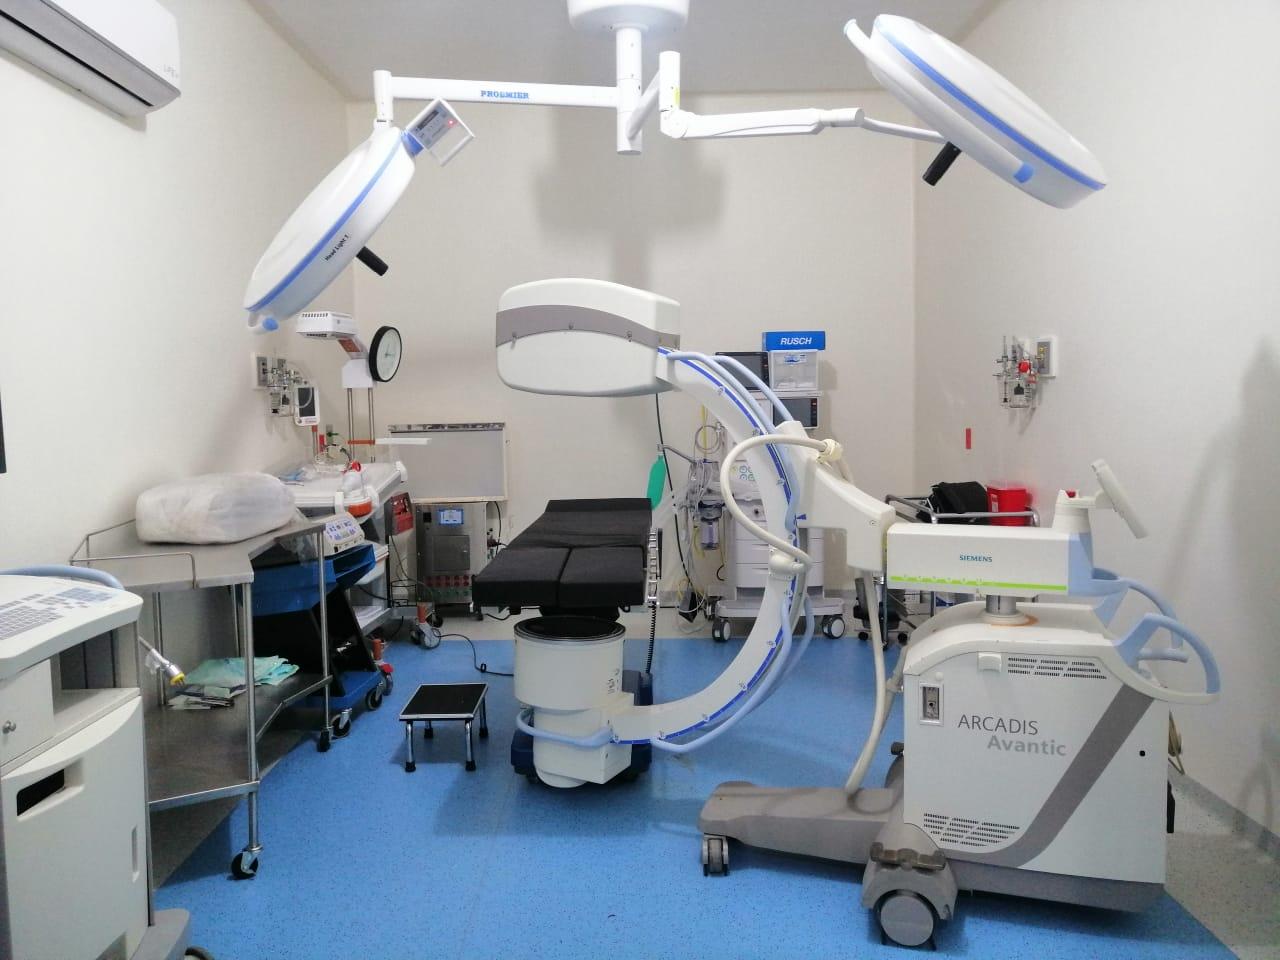 The modern, well-equipped operating room in the new clinic.